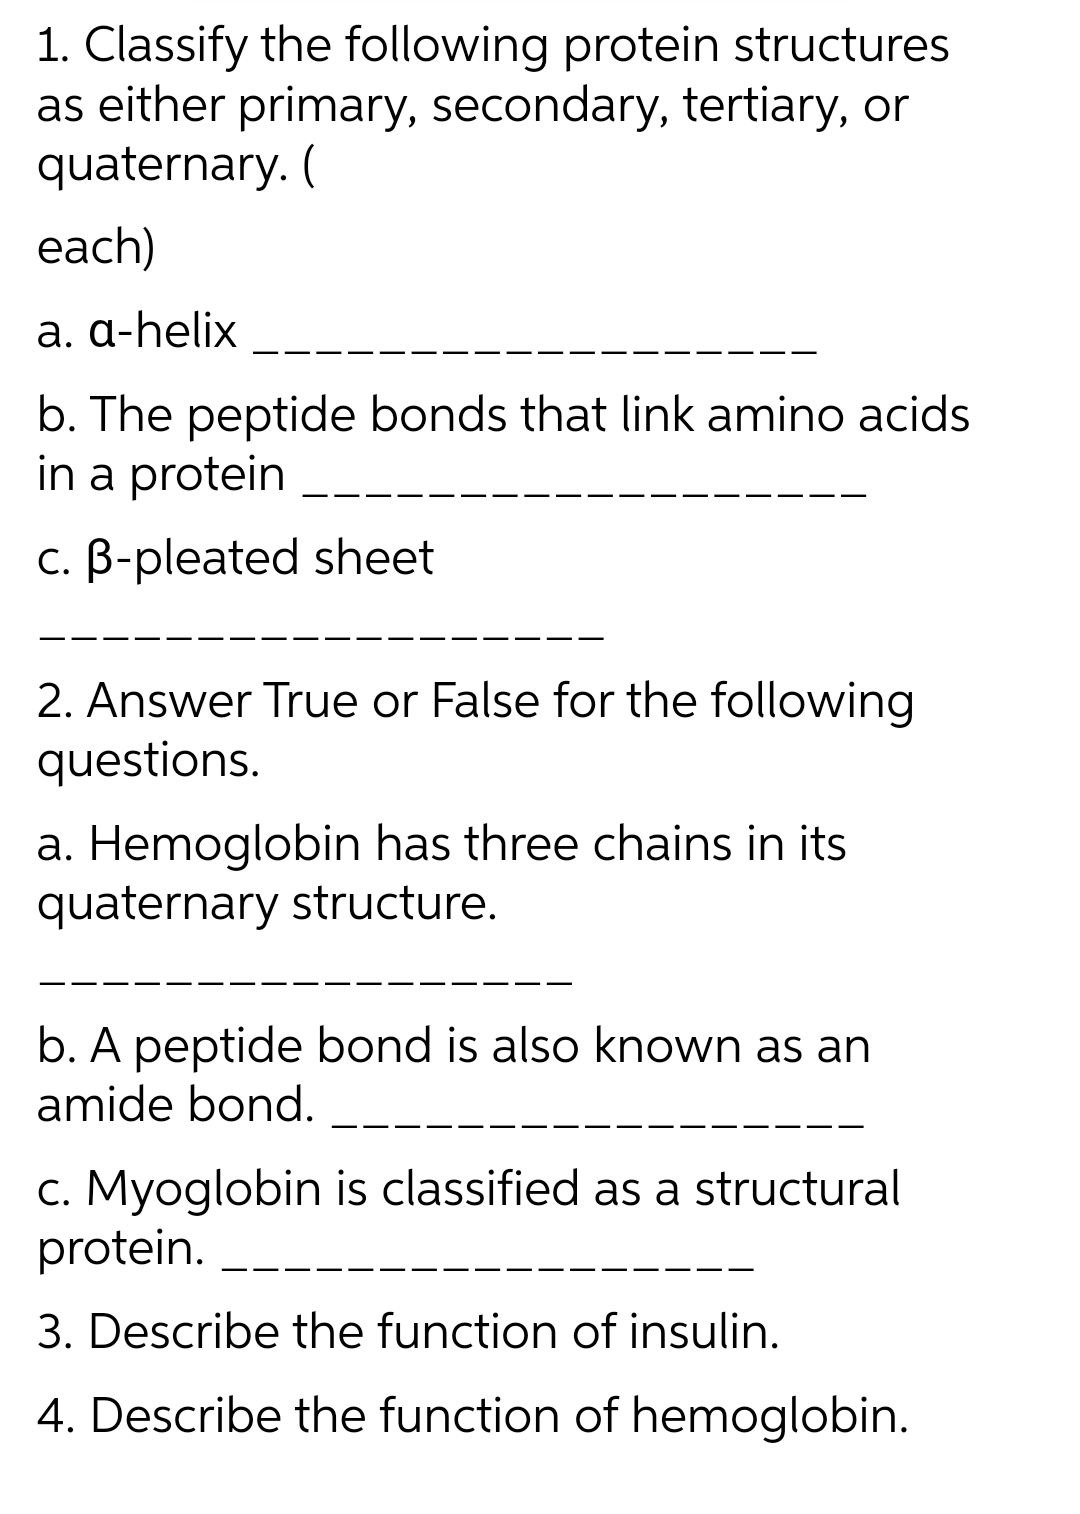 1. Classify the following protein structures
as either primary, secondary, tertiary, or
quaternary. (
each)
a. a-helix
b. The peptide bonds that link amino acids
in a protein
c. B-pleated sheet
2. Answer True or False for the following
questions.
a. Hemoglobin has three chains in its
quaternary structure.
b. A peptide bond is also known as an
amide bond.
c. Myoglobin is classified as a structural
protein.
3. Describe the function of insulin.
4. Describe the function of hemoglobin.
